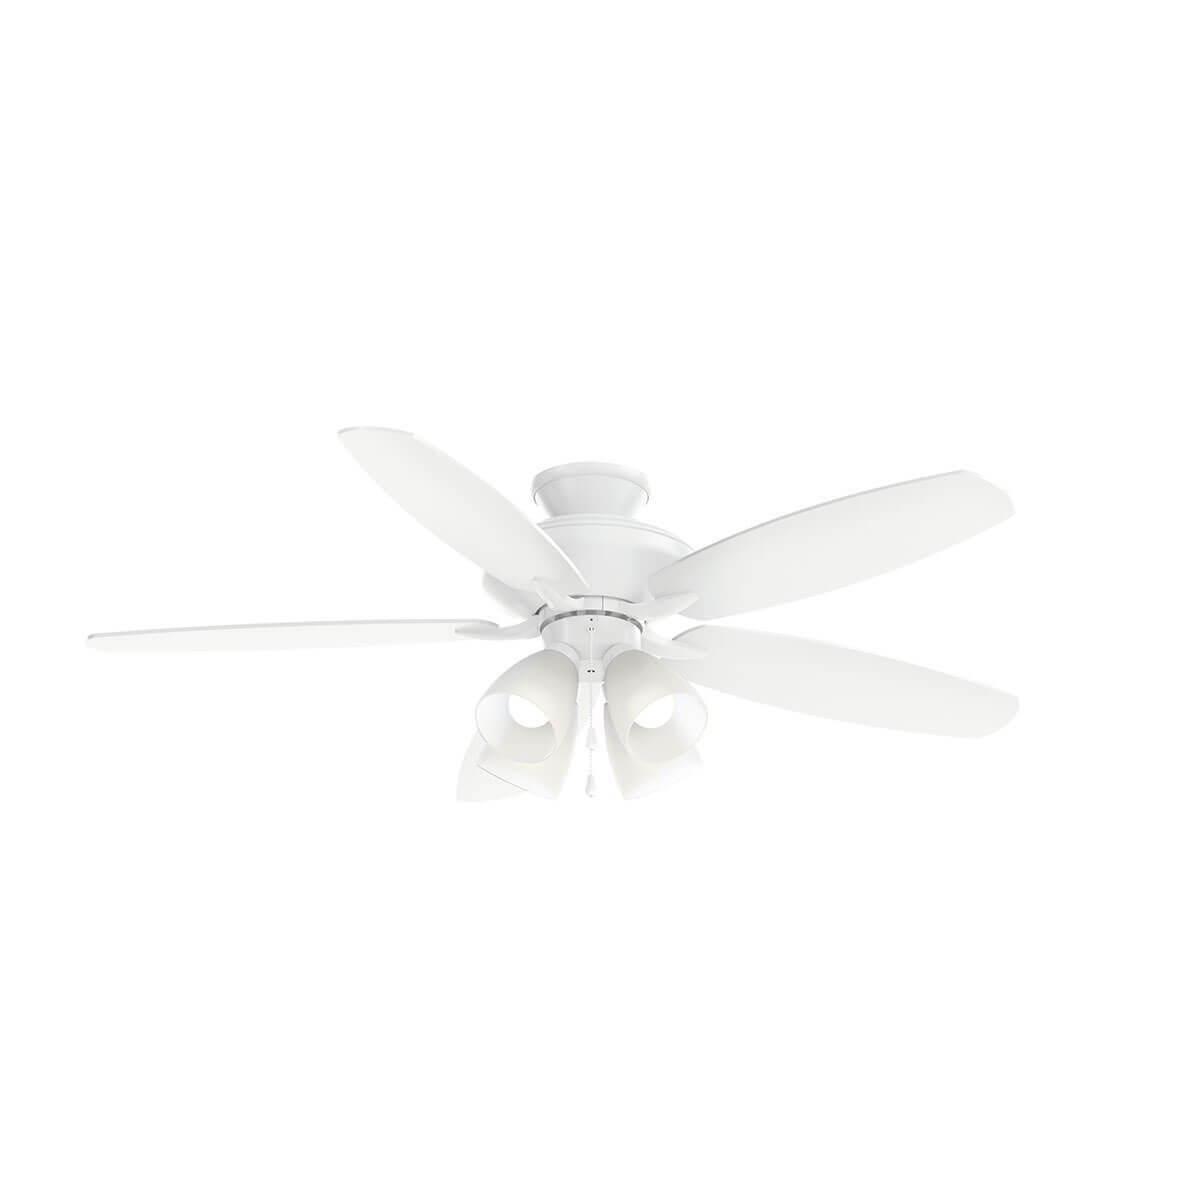 Kichler 330162MWH Renew 52 inch 5 Blade Pull Chain LED Ceiling Fan in Matte White